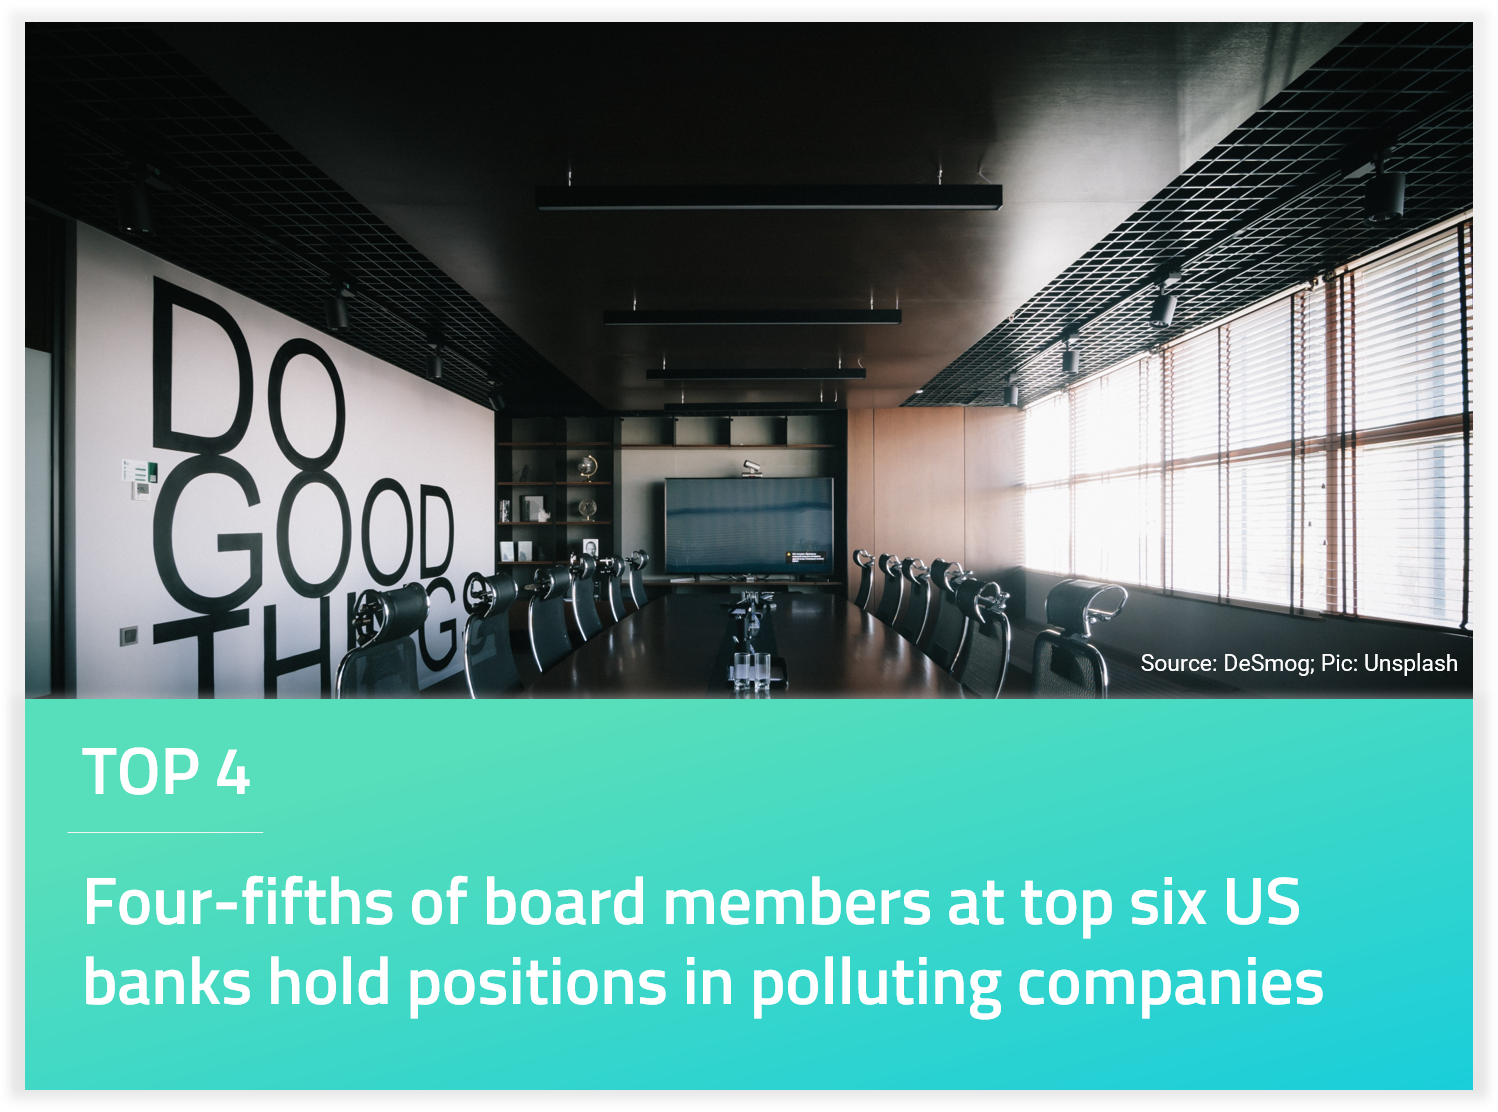 Four-fifths of board members at top six US banks hold positions in polluting companies